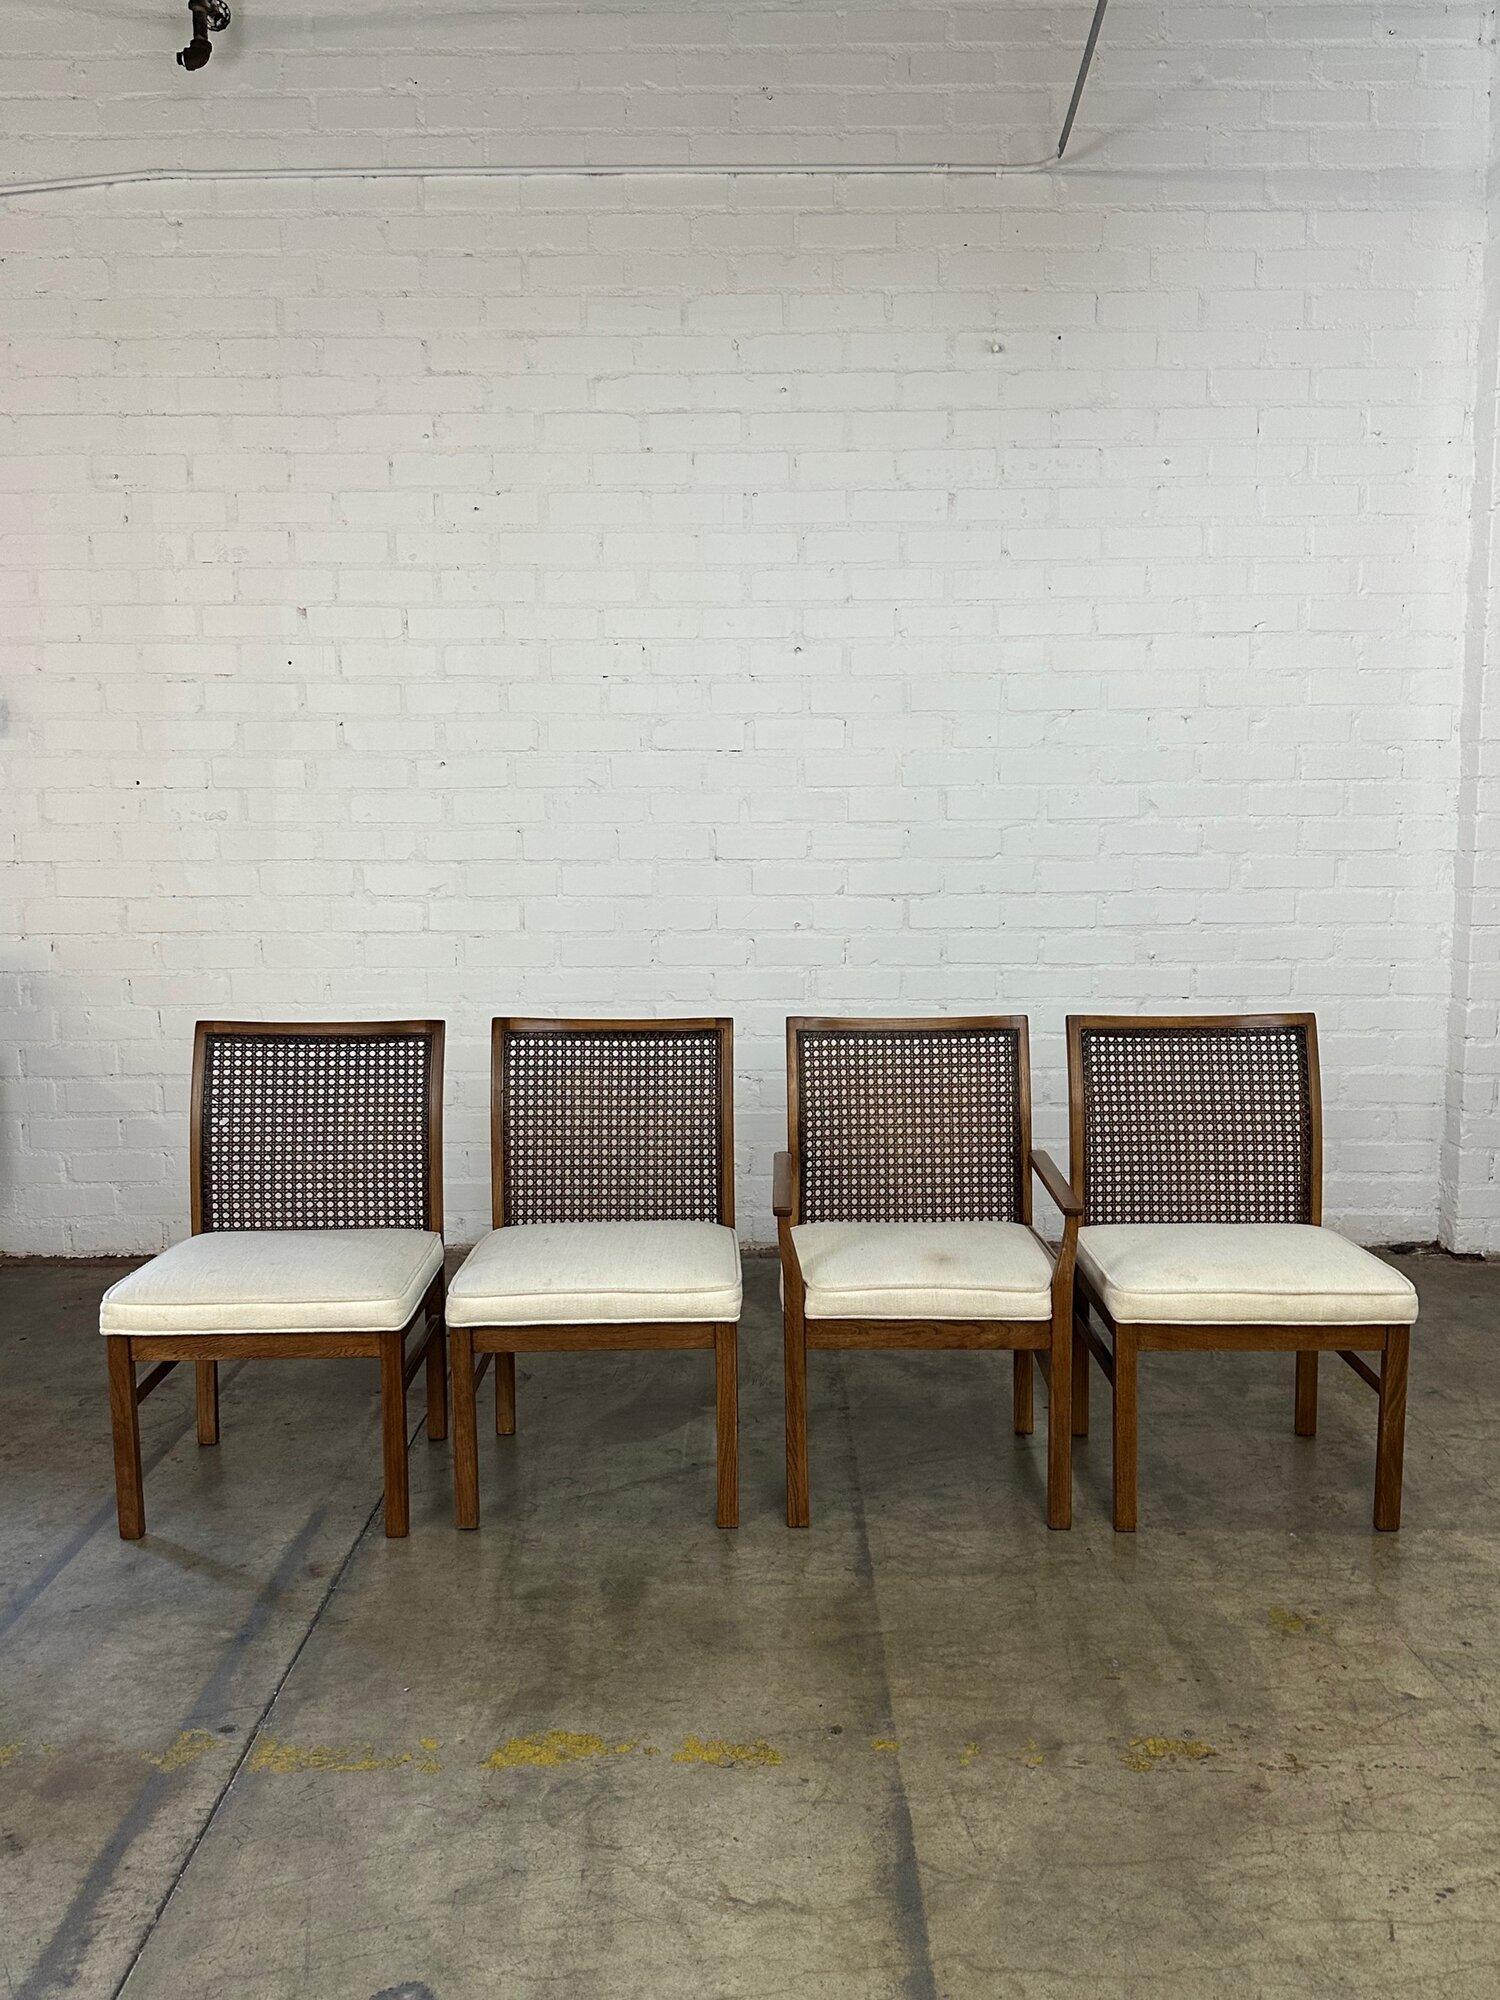 W21 D21 H35 SW20.5 SD18 SH18

with arm W22 D22 H35 SW17 SD17.5 SH18 AH23

Vintage dining chairs by Lane in great condition. Frames have been fully restored and are structurally sound and sturdy. Chair do have original upholstery in usable